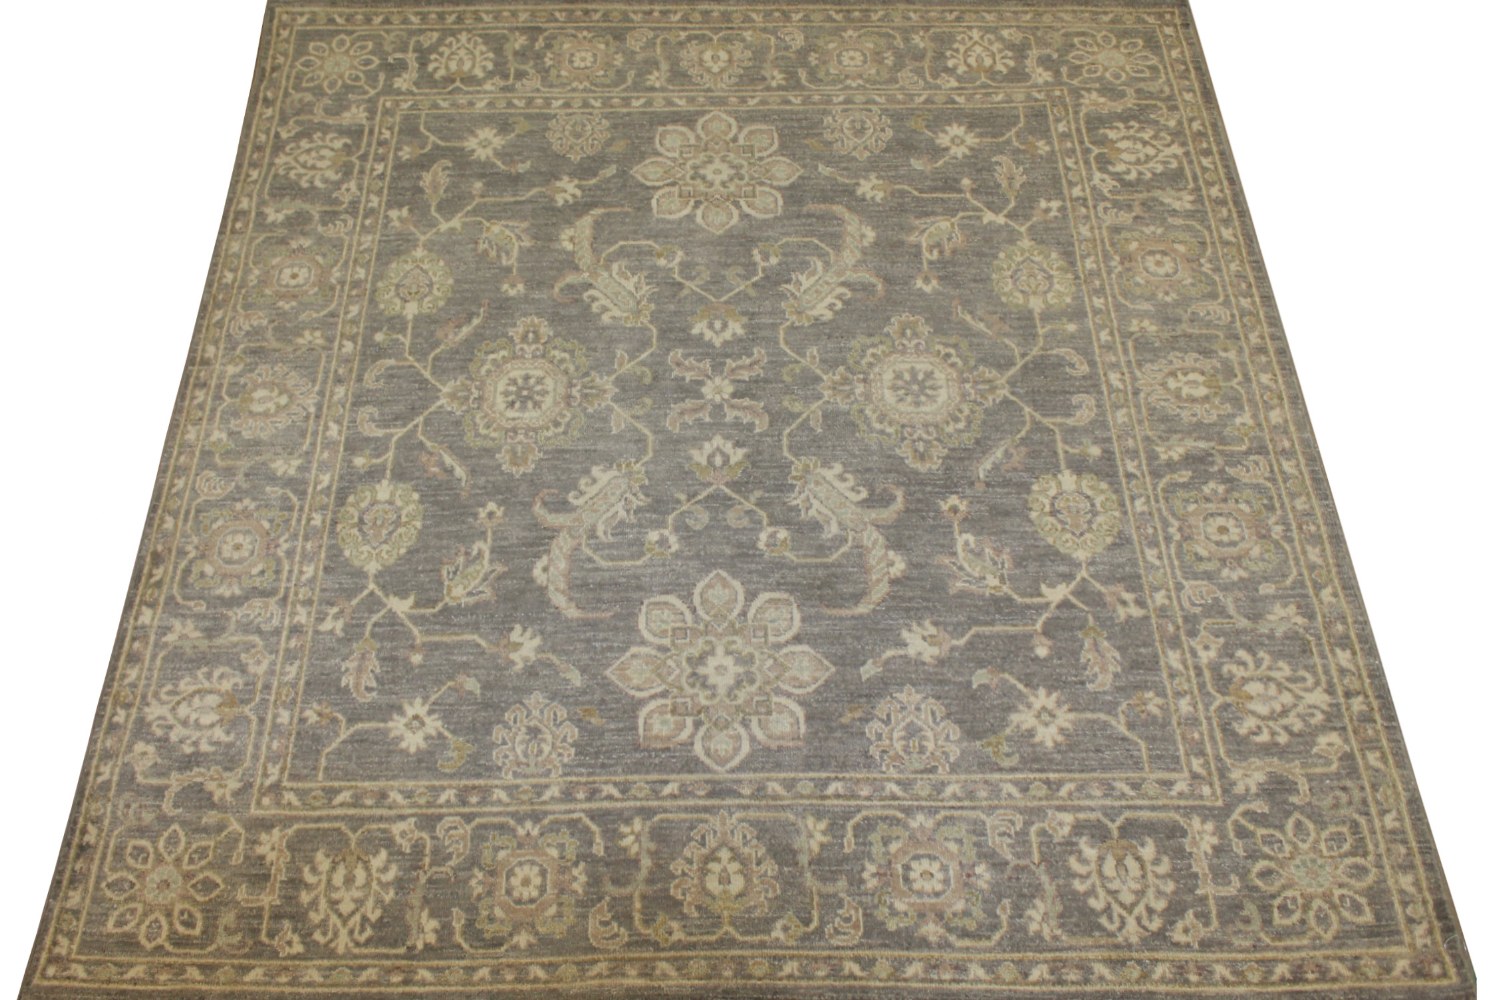 6 ft. - 7 ft. Round & Square Peshawar Hand Knotted Wool Area Rug - MR17276